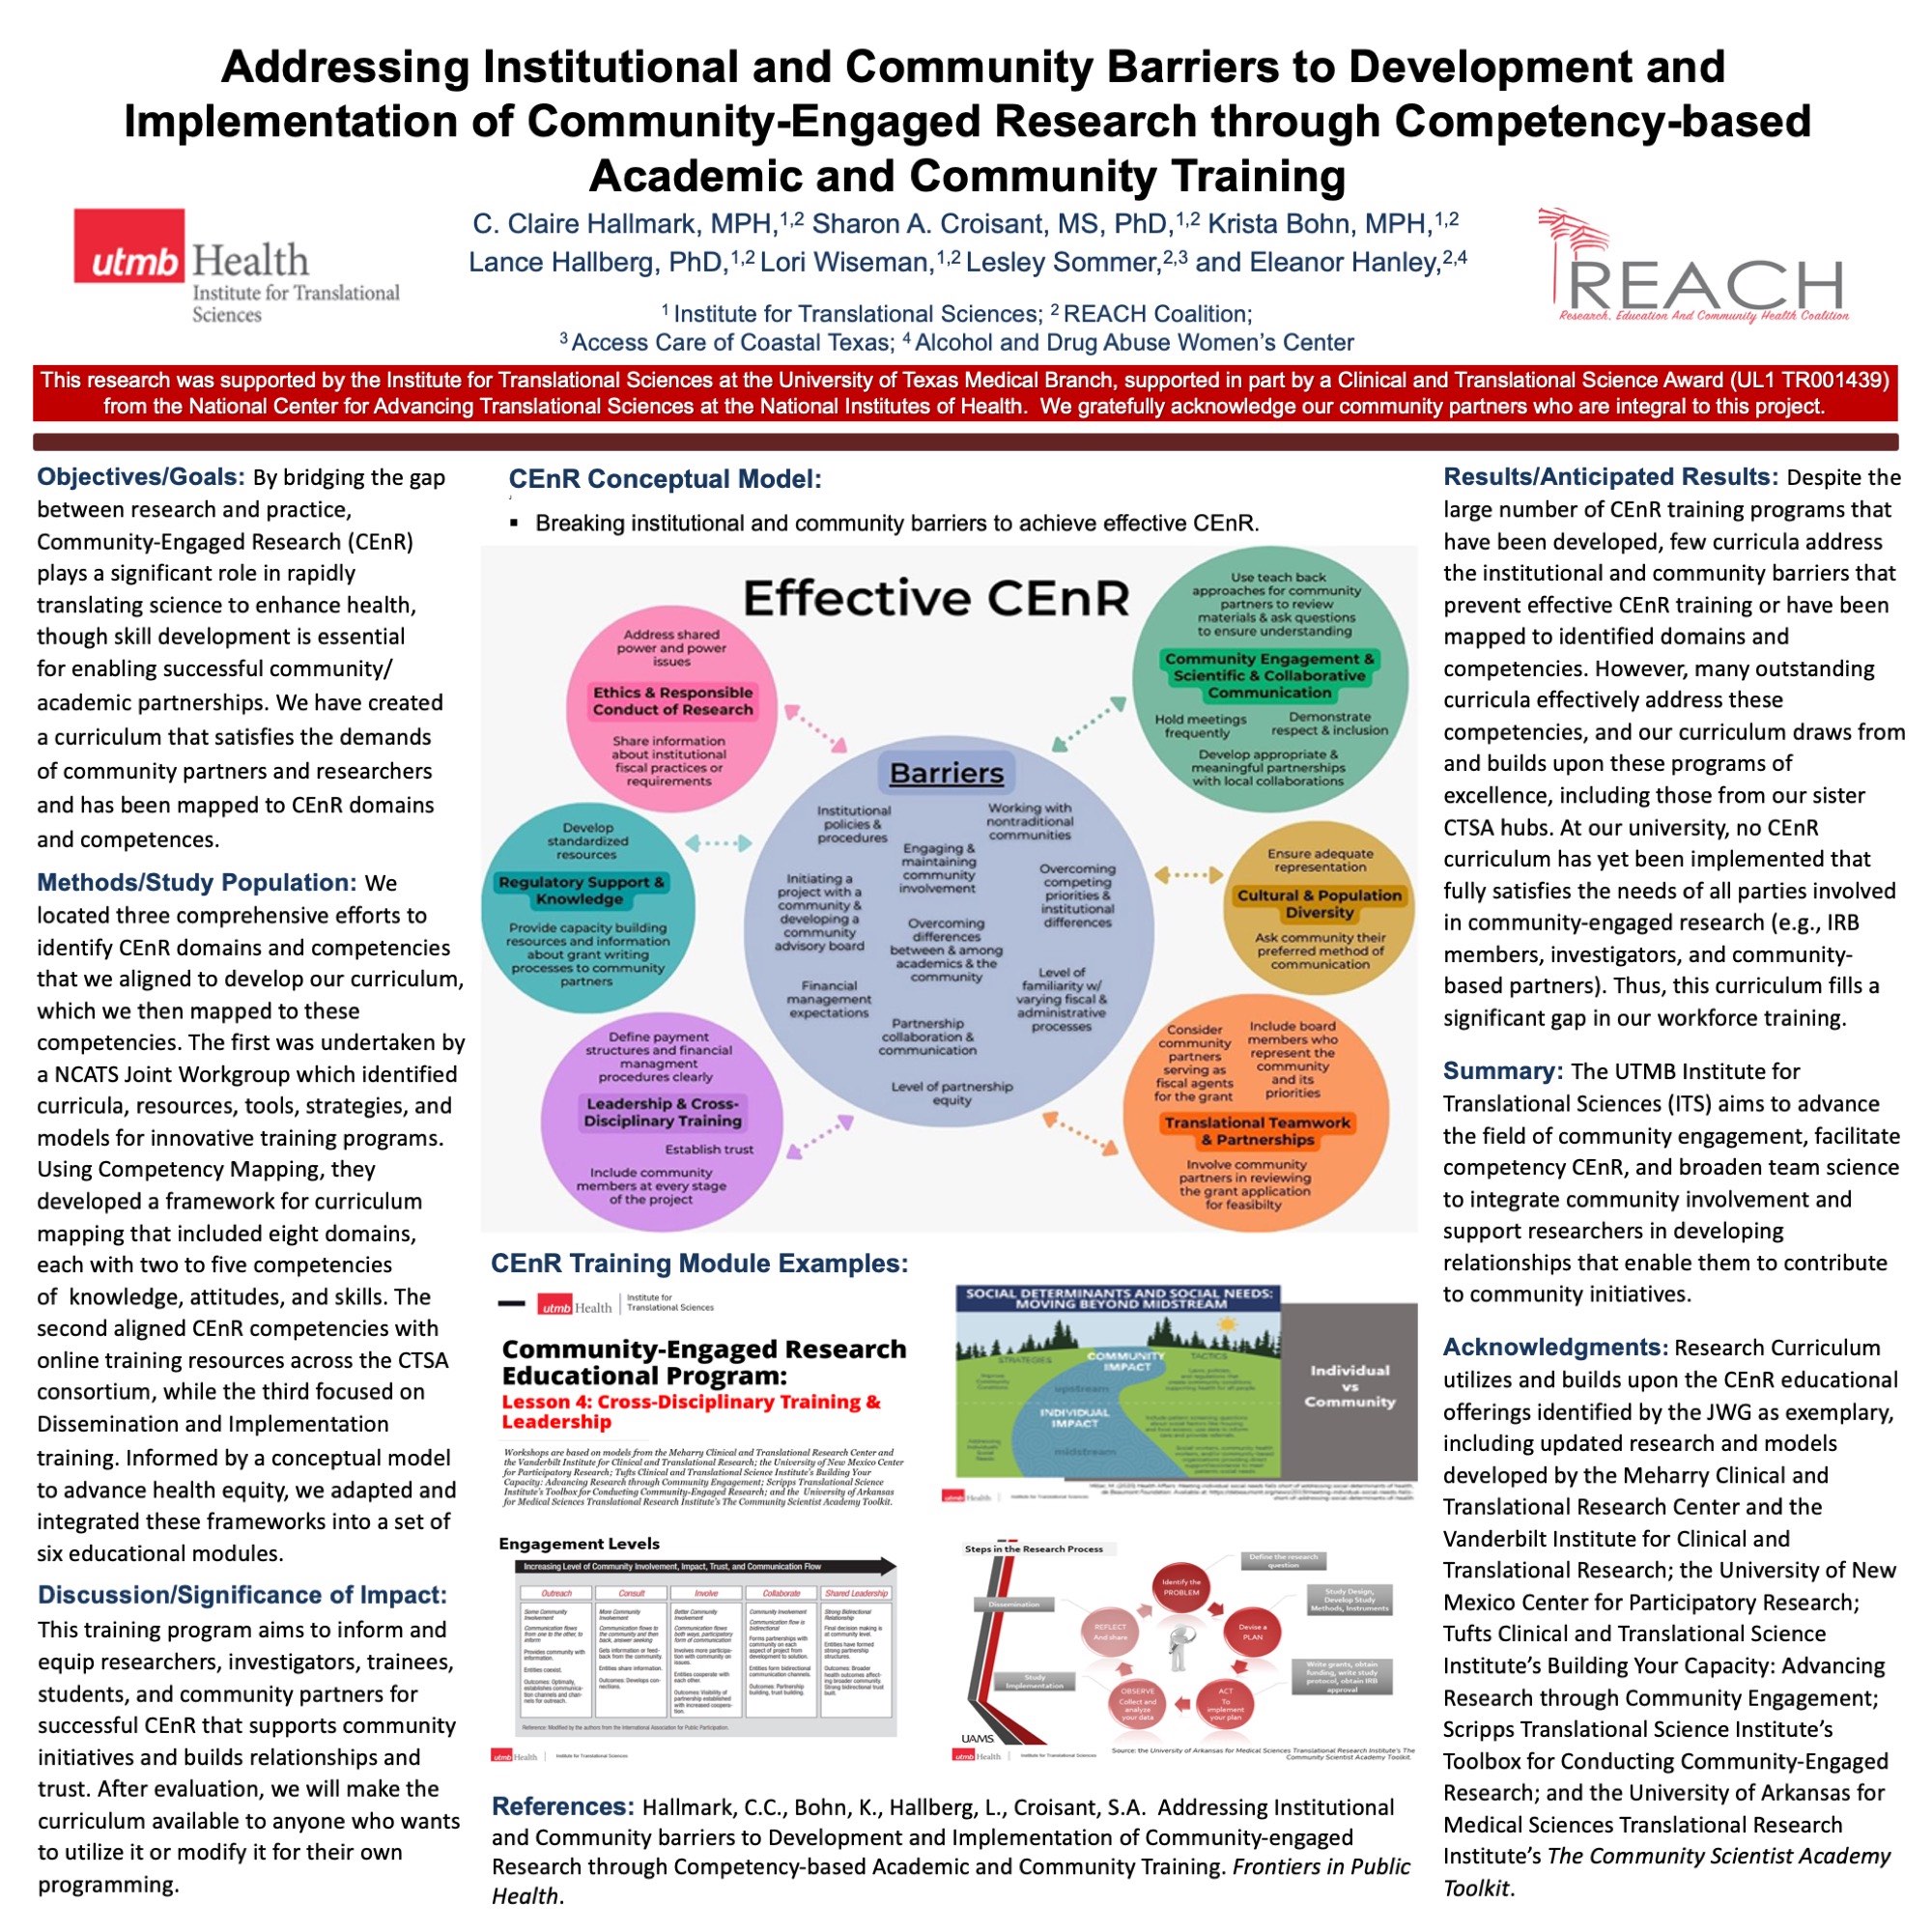 An image of a research poster entitled " Addressing Institutional and Community Barriers to Development and Implementation of Community-Engaged Research through Competency-based Academic and Community Training"